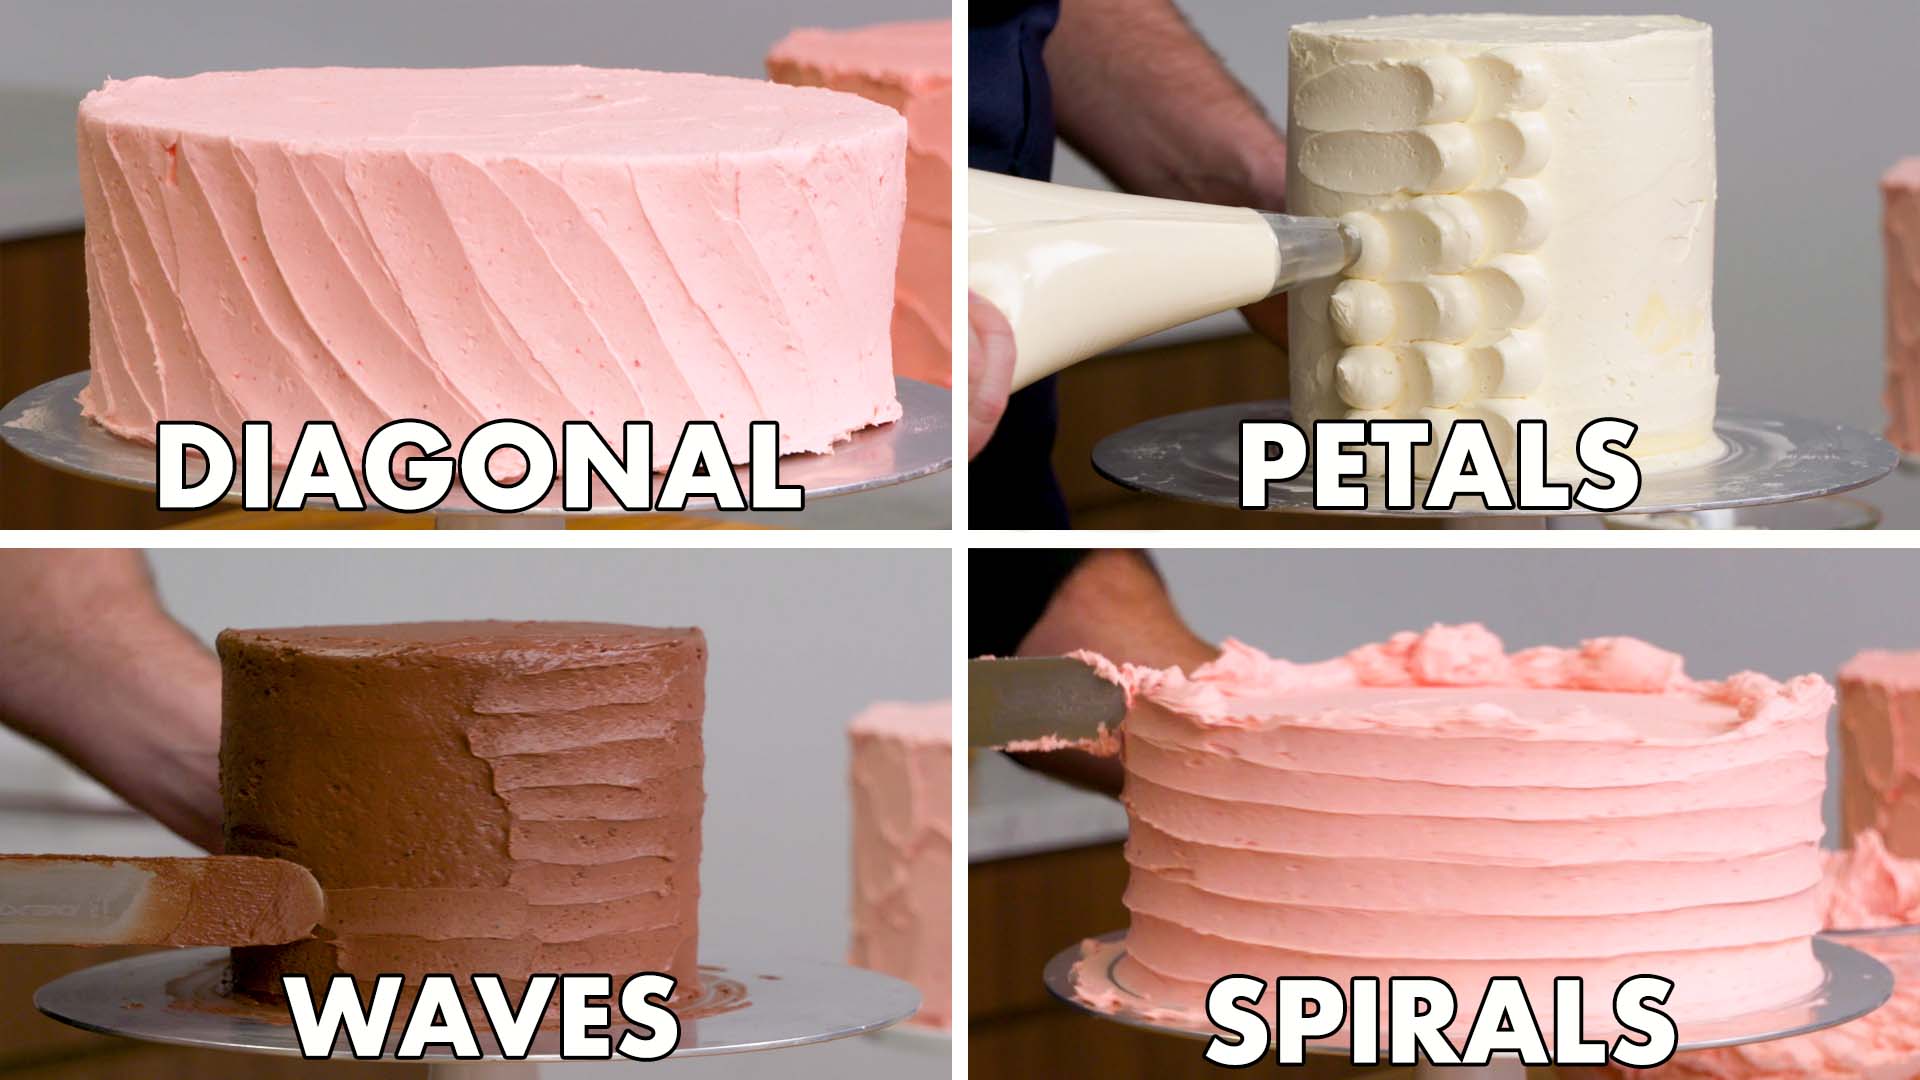 Watch How To Make Every Cake | Method Mastery | Epicurious